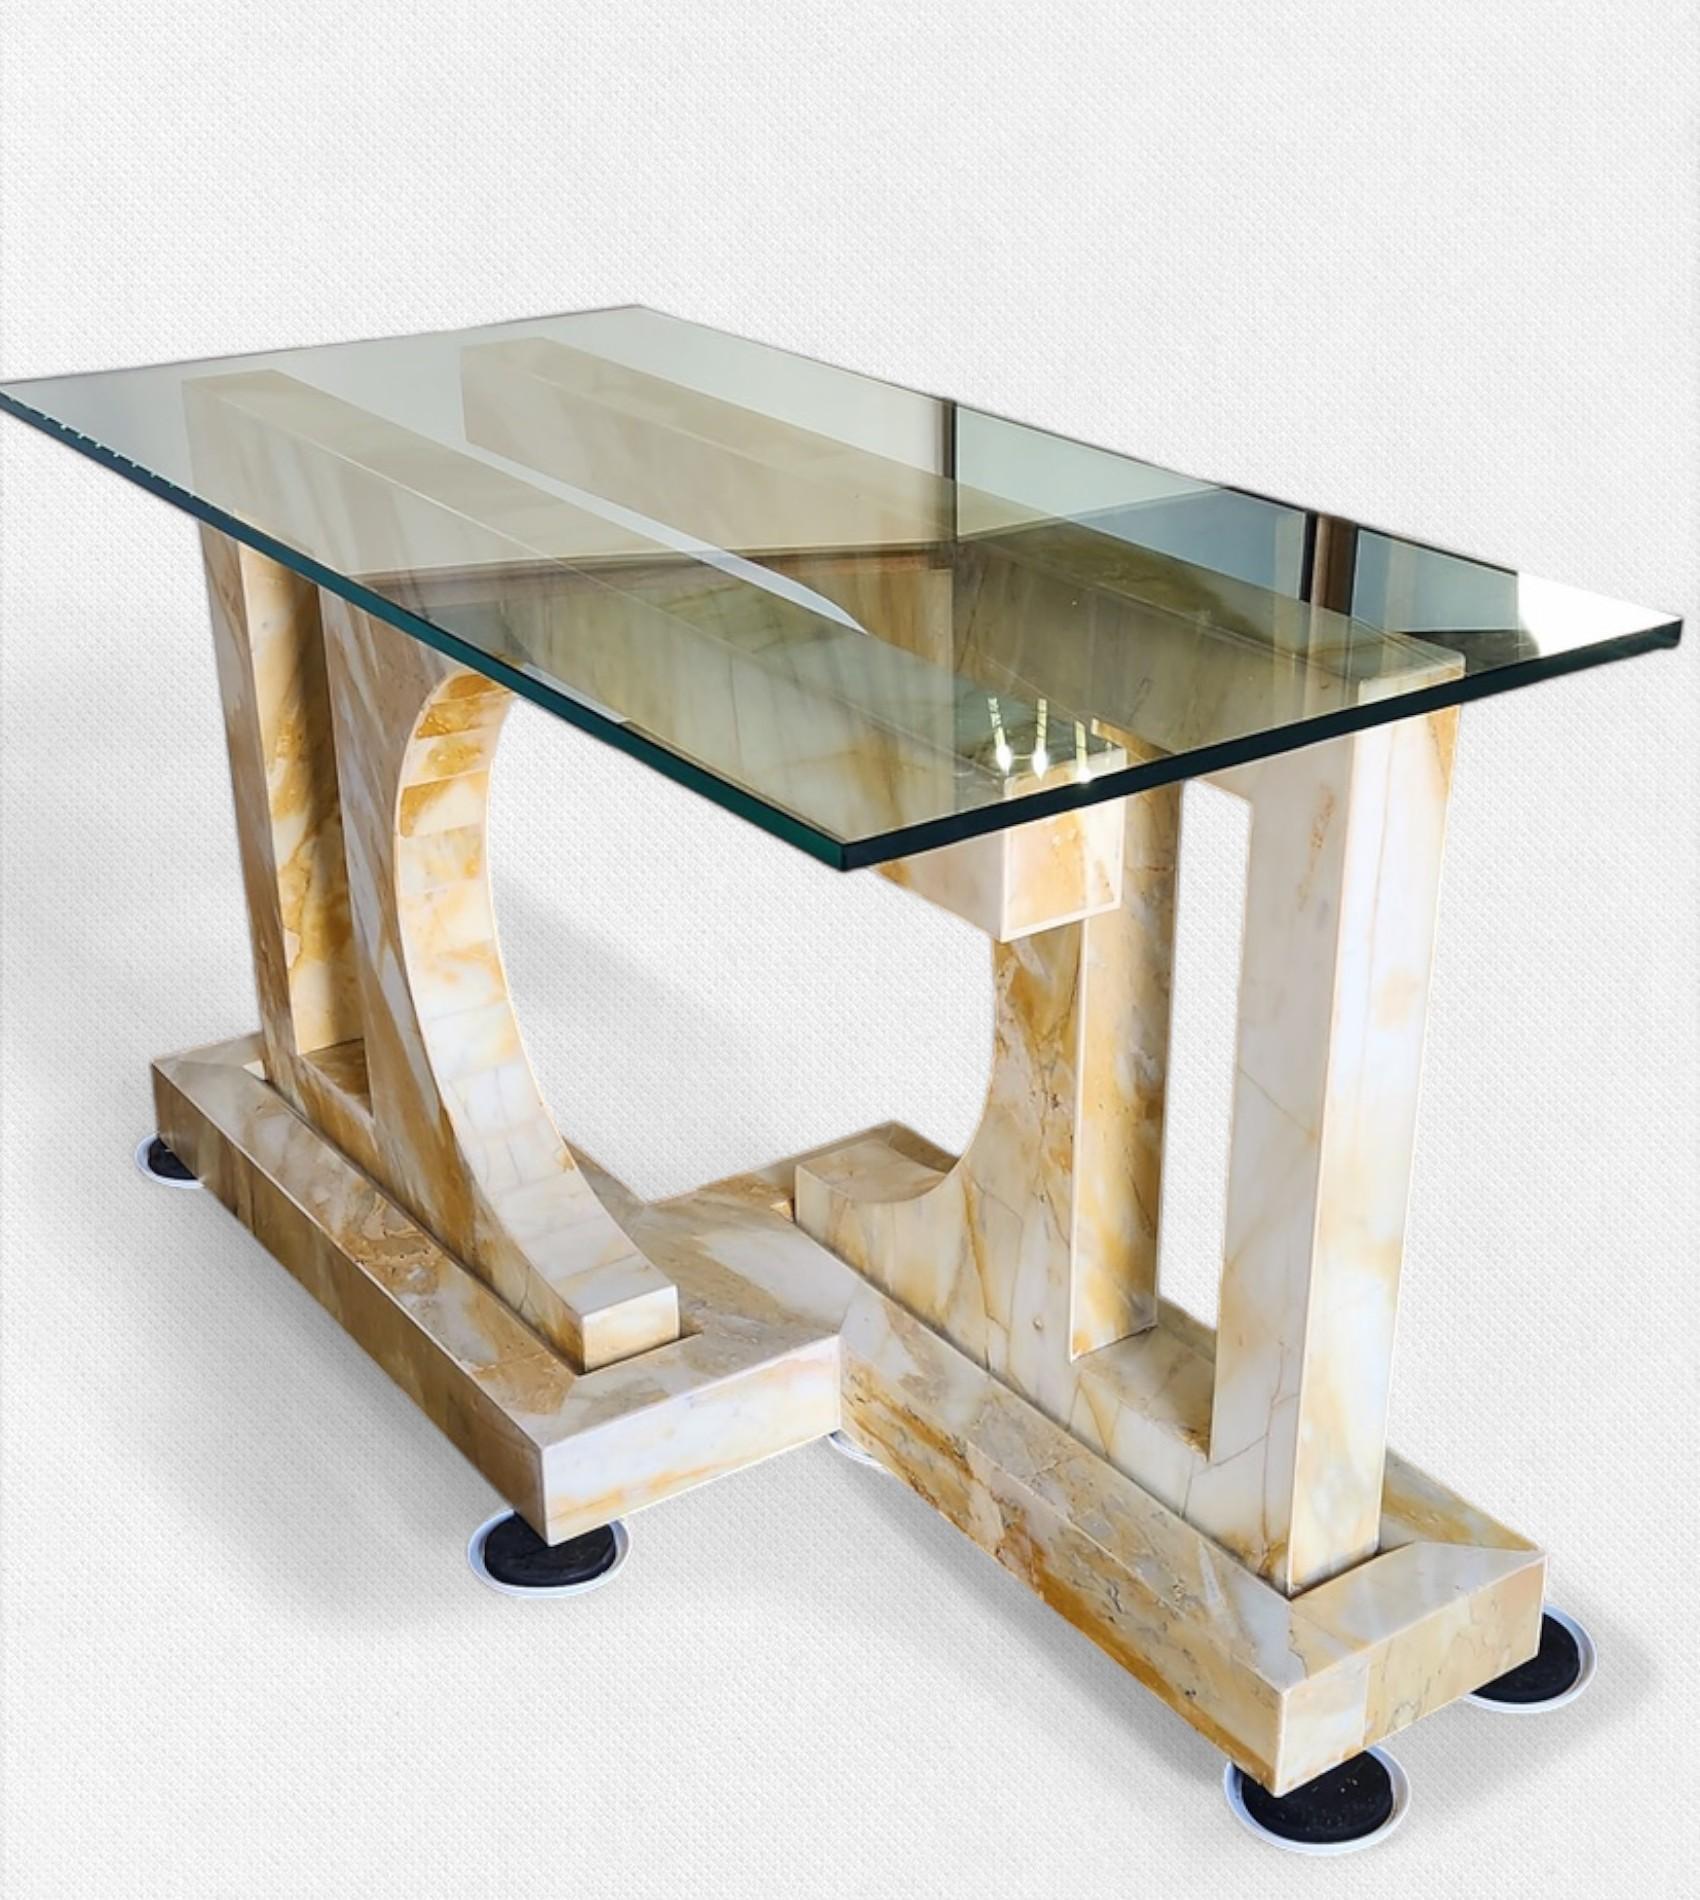 American Paul Puccio Giallo Siena Marble Dining Table/ Console 1976 Brooklyn New York For Sale